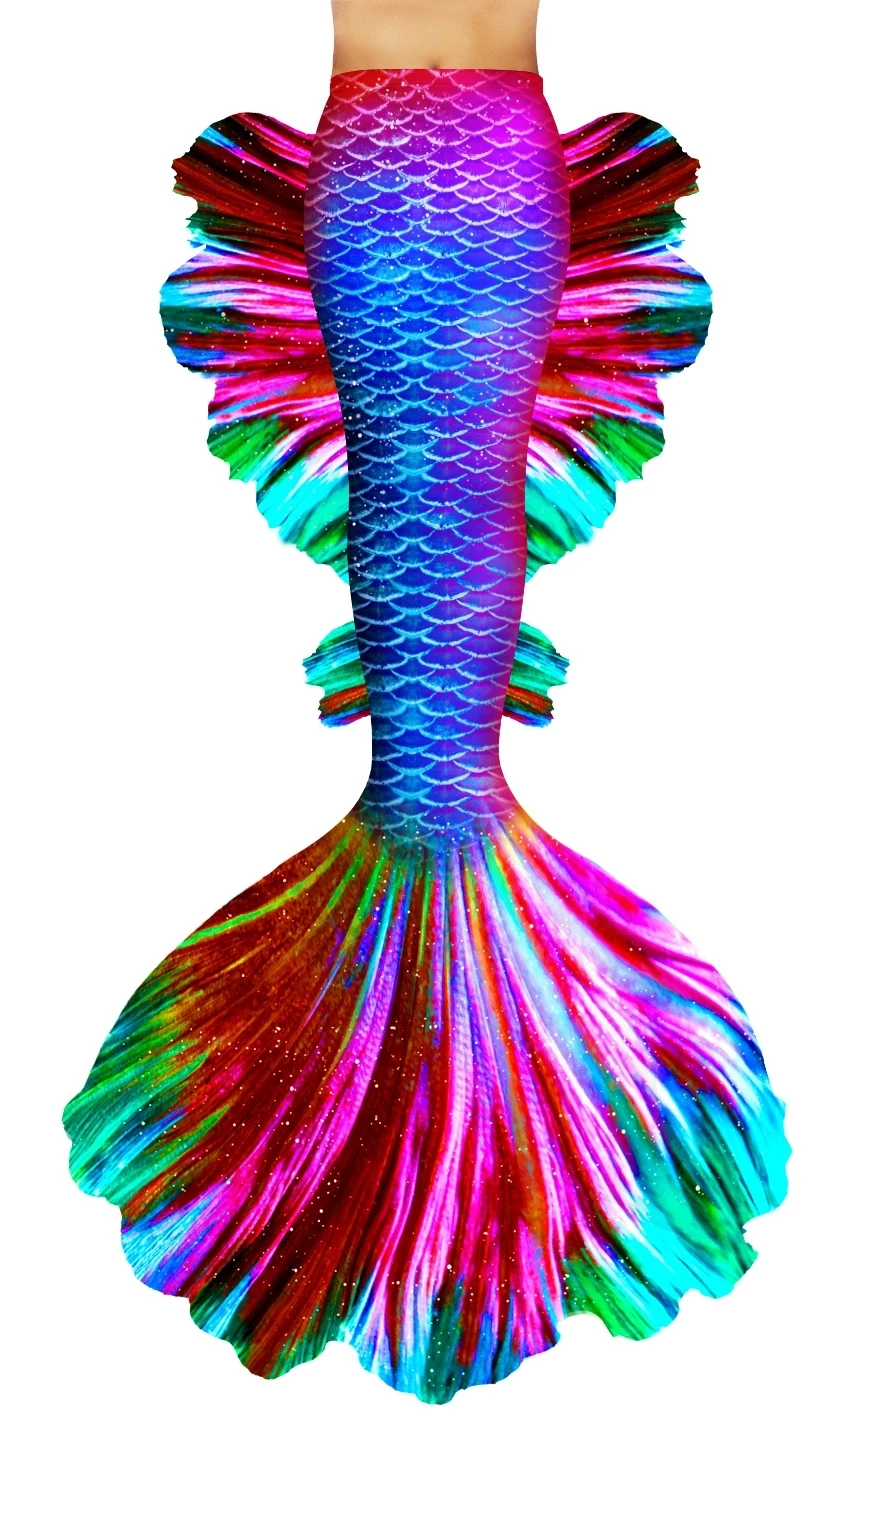 Mermaid-Tail-Swimable-Mermaid-Tails-Without-Monofin-for-Swimming-Beach-Artifact-Halloween-Cosplay-Costume-Christmas-Gift(22)